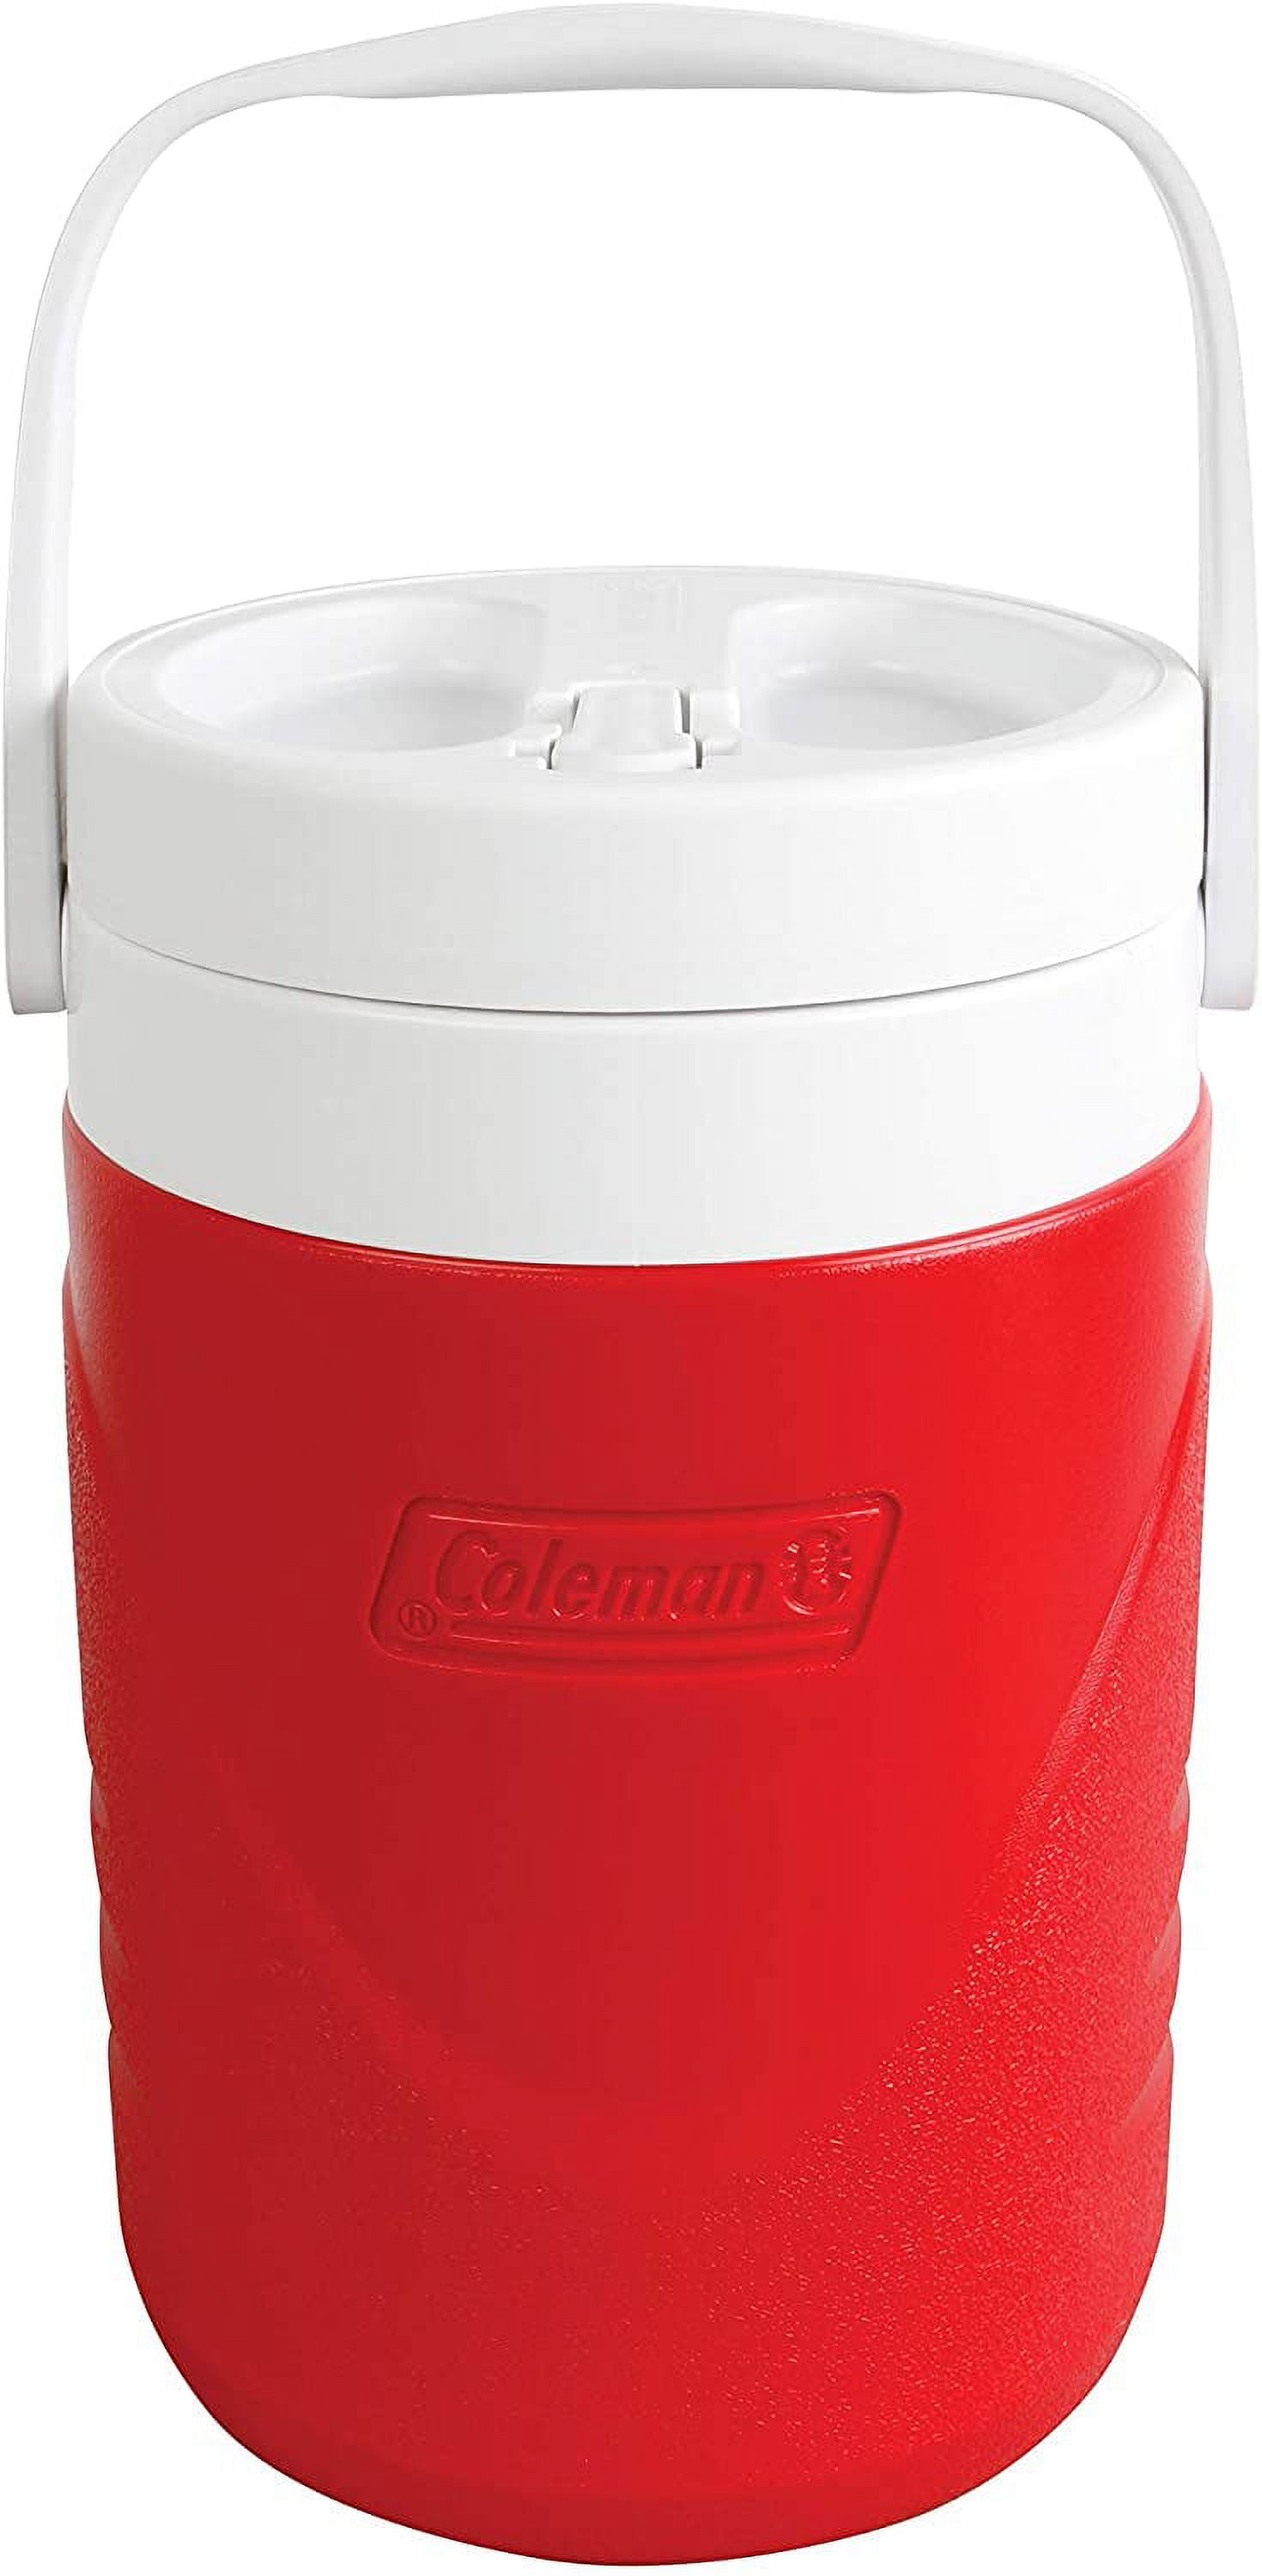  Coleman Pro Heavy-Duty Insulated Gallon Water Jug, Leakproof  Portable Jug for Rugged Outdoor Use & Jobsites, Durable Steel Water Jug  with Anchor Point for Ultimate Portability : Tools & Home Improvement